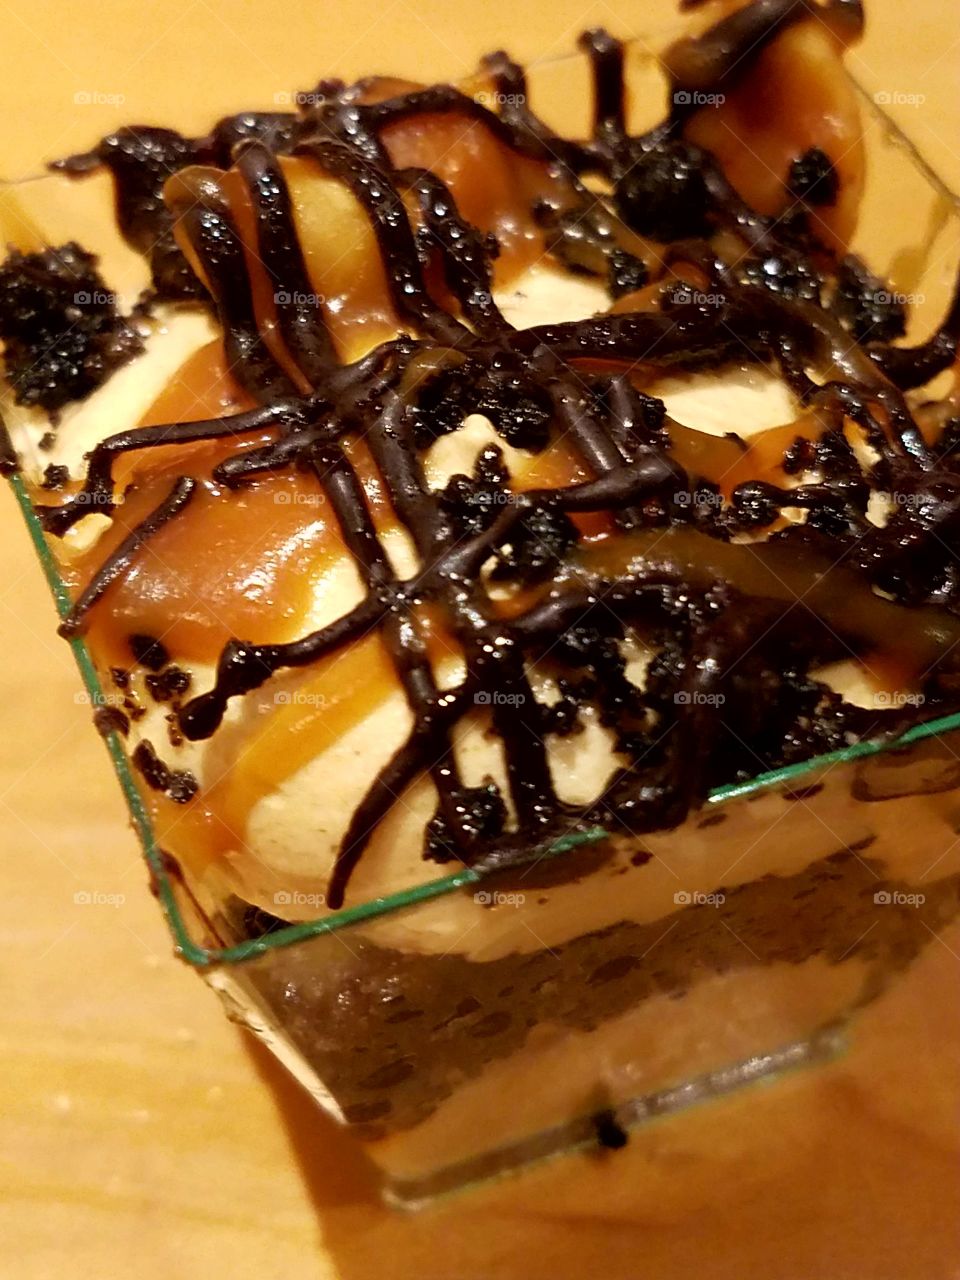 peanut butter chocolate cream dessert topped with caramel and chocolate swirls